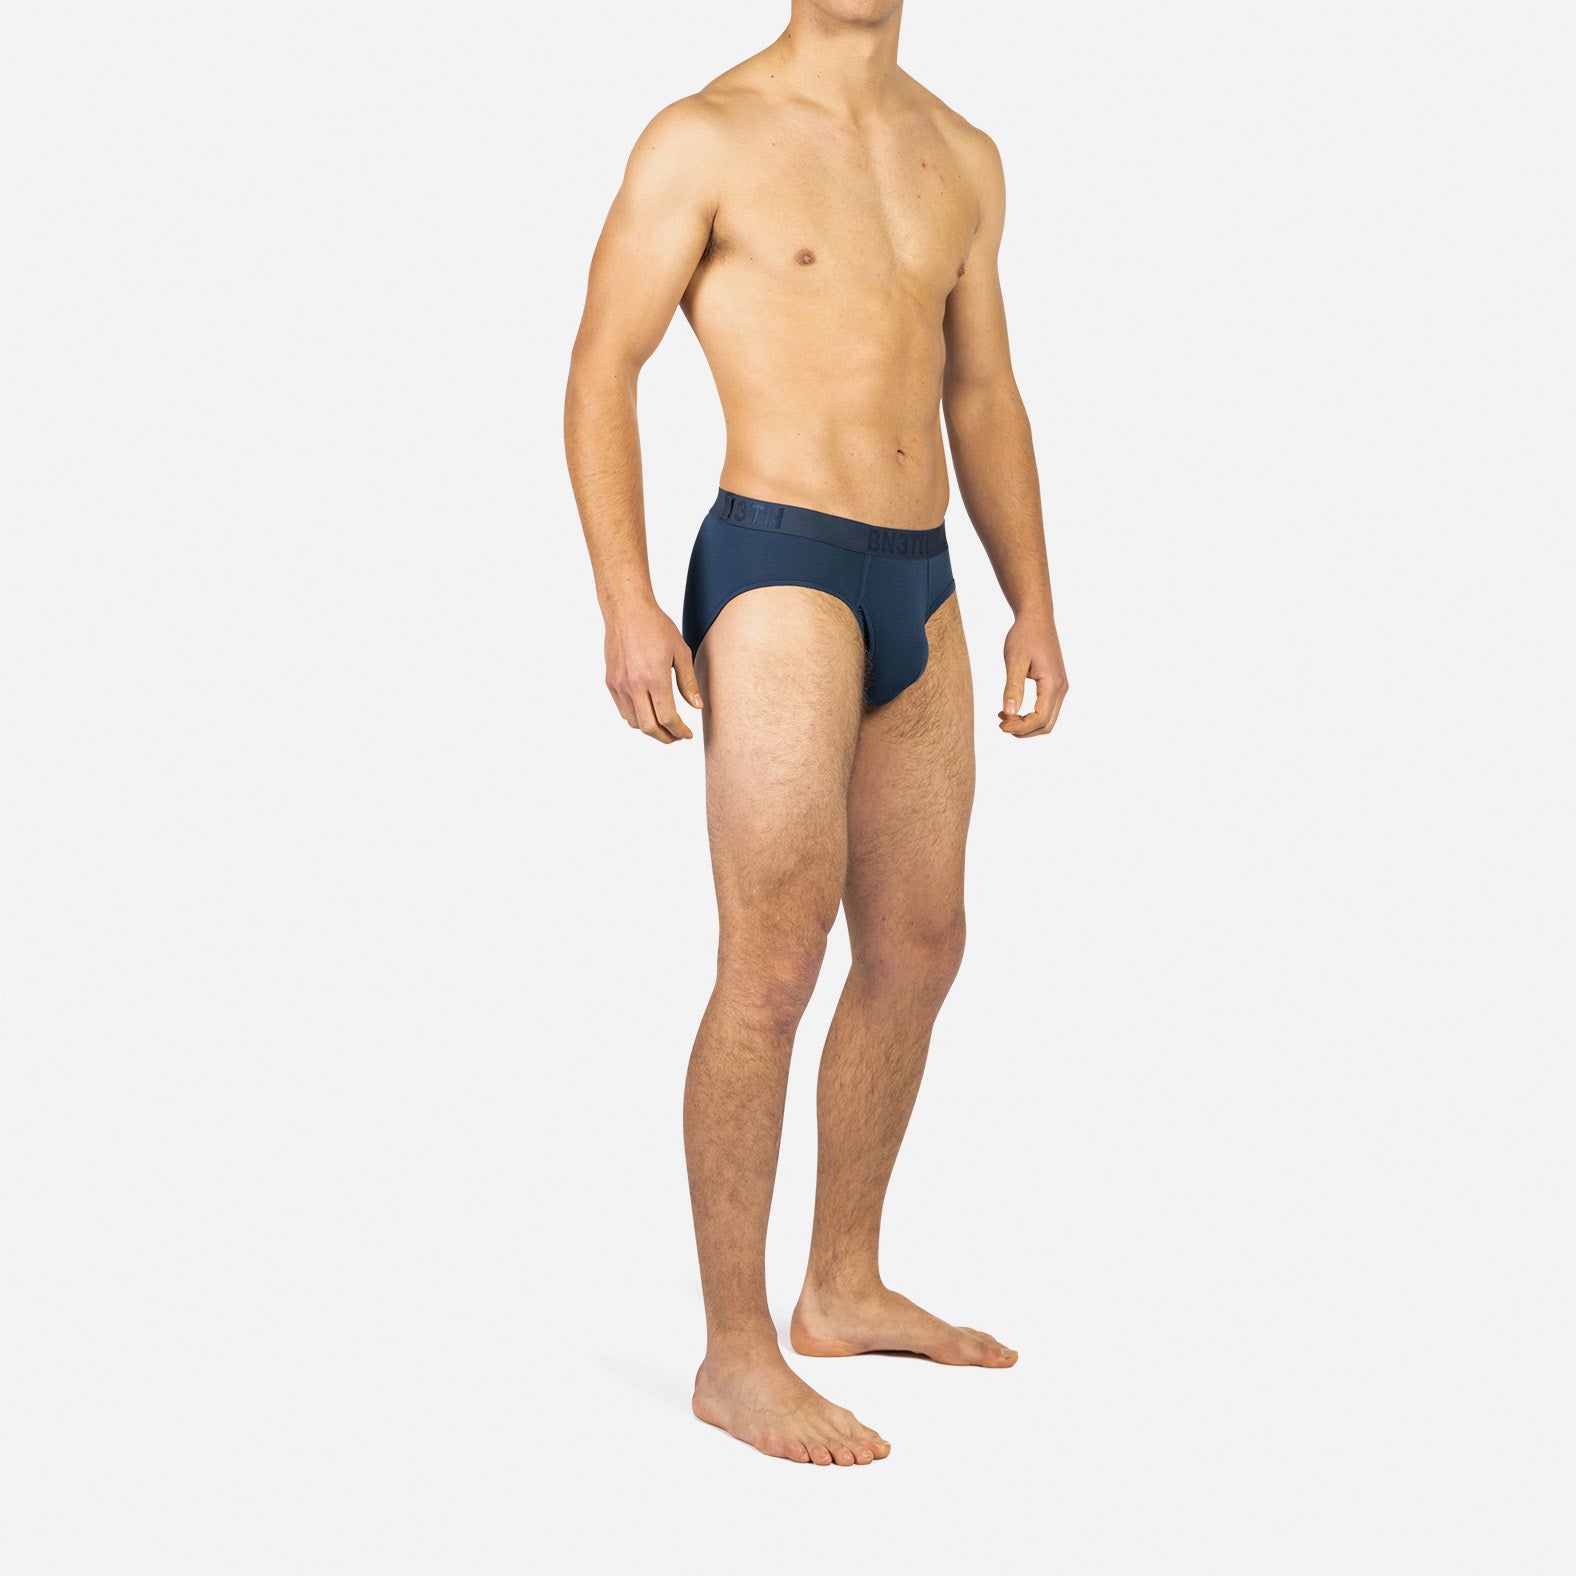 CLASSIC BRIEF WITH FLY: NAVY